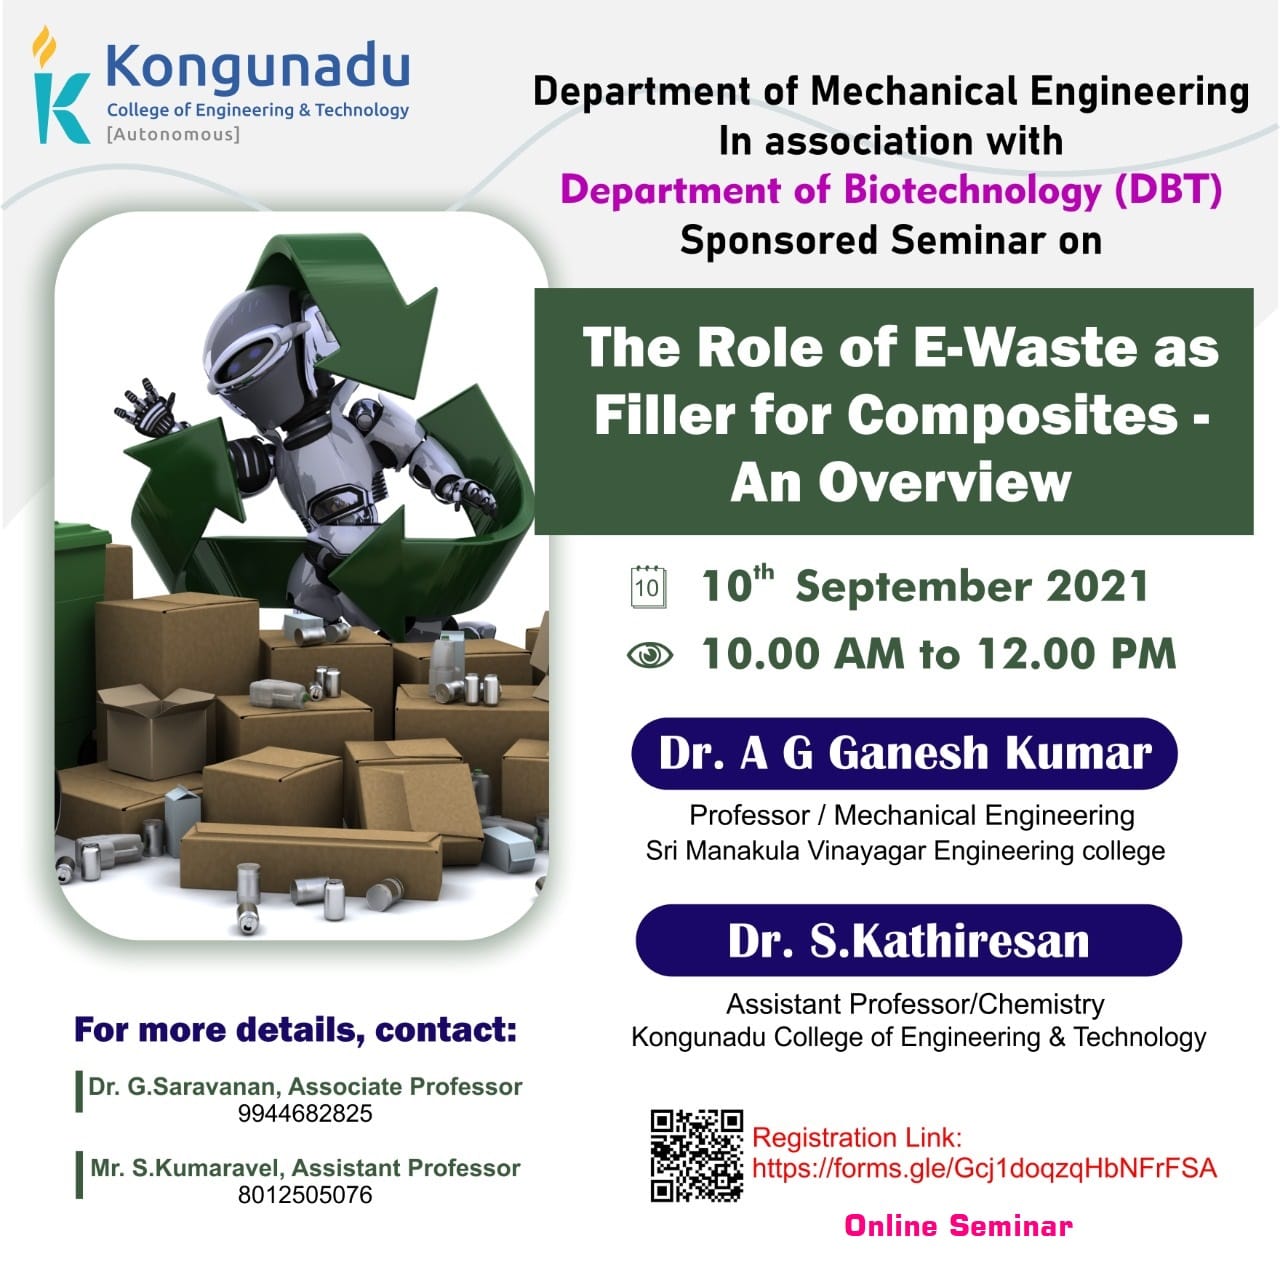 Online seminar on The Role of E-Waste as Filler for Composites - An Overview  2021